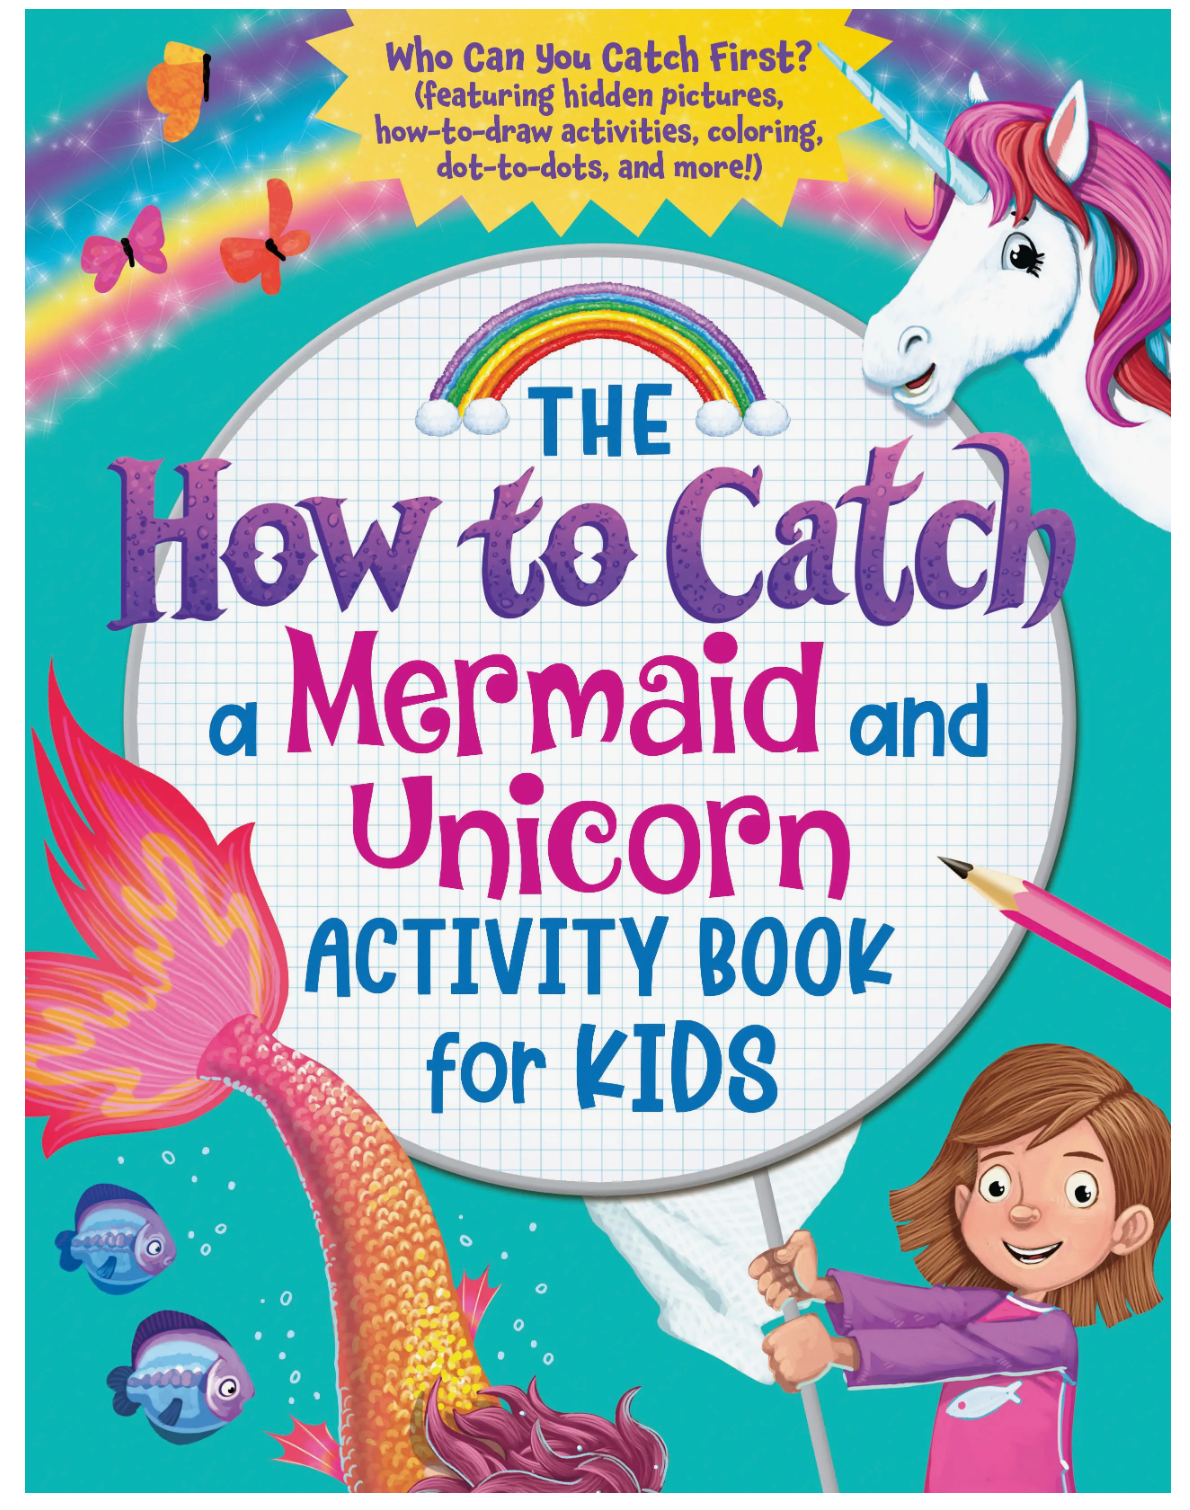 HOW TO CATCH A MERMAID AND UNICORN